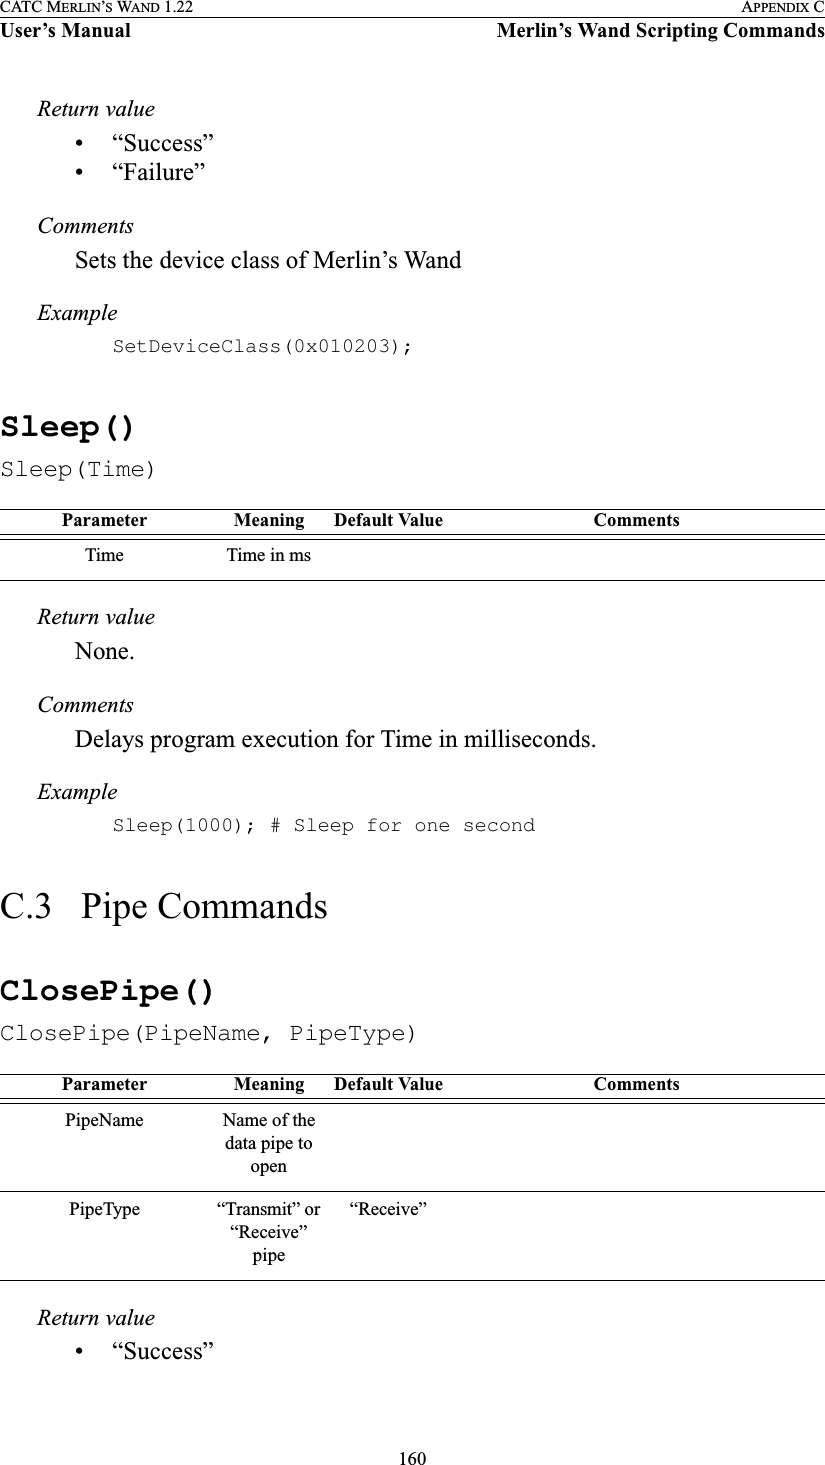 160CATC MERLIN’S WAND 1.22 APPENDIX CUser’s Manual Merlin’s Wand Scripting CommandsReturn value• “Success”• “Failure”CommentsSets the device class of Merlin’s WandExampleSetDeviceClass(0x010203);Sleep()Sleep(Time)Return valueNone.CommentsDelays program execution for Time in milliseconds.ExampleSleep(1000); # Sleep for one secondC.3   Pipe CommandsClosePipe()ClosePipe(PipeName, PipeType)Return value• “Success”Parameter Meaning Default Value CommentsTime Time in msParameter Meaning Default Value CommentsPipeName Name of the data pipe to openPipeType “Transmit” or “Receive” pipe“Receive”